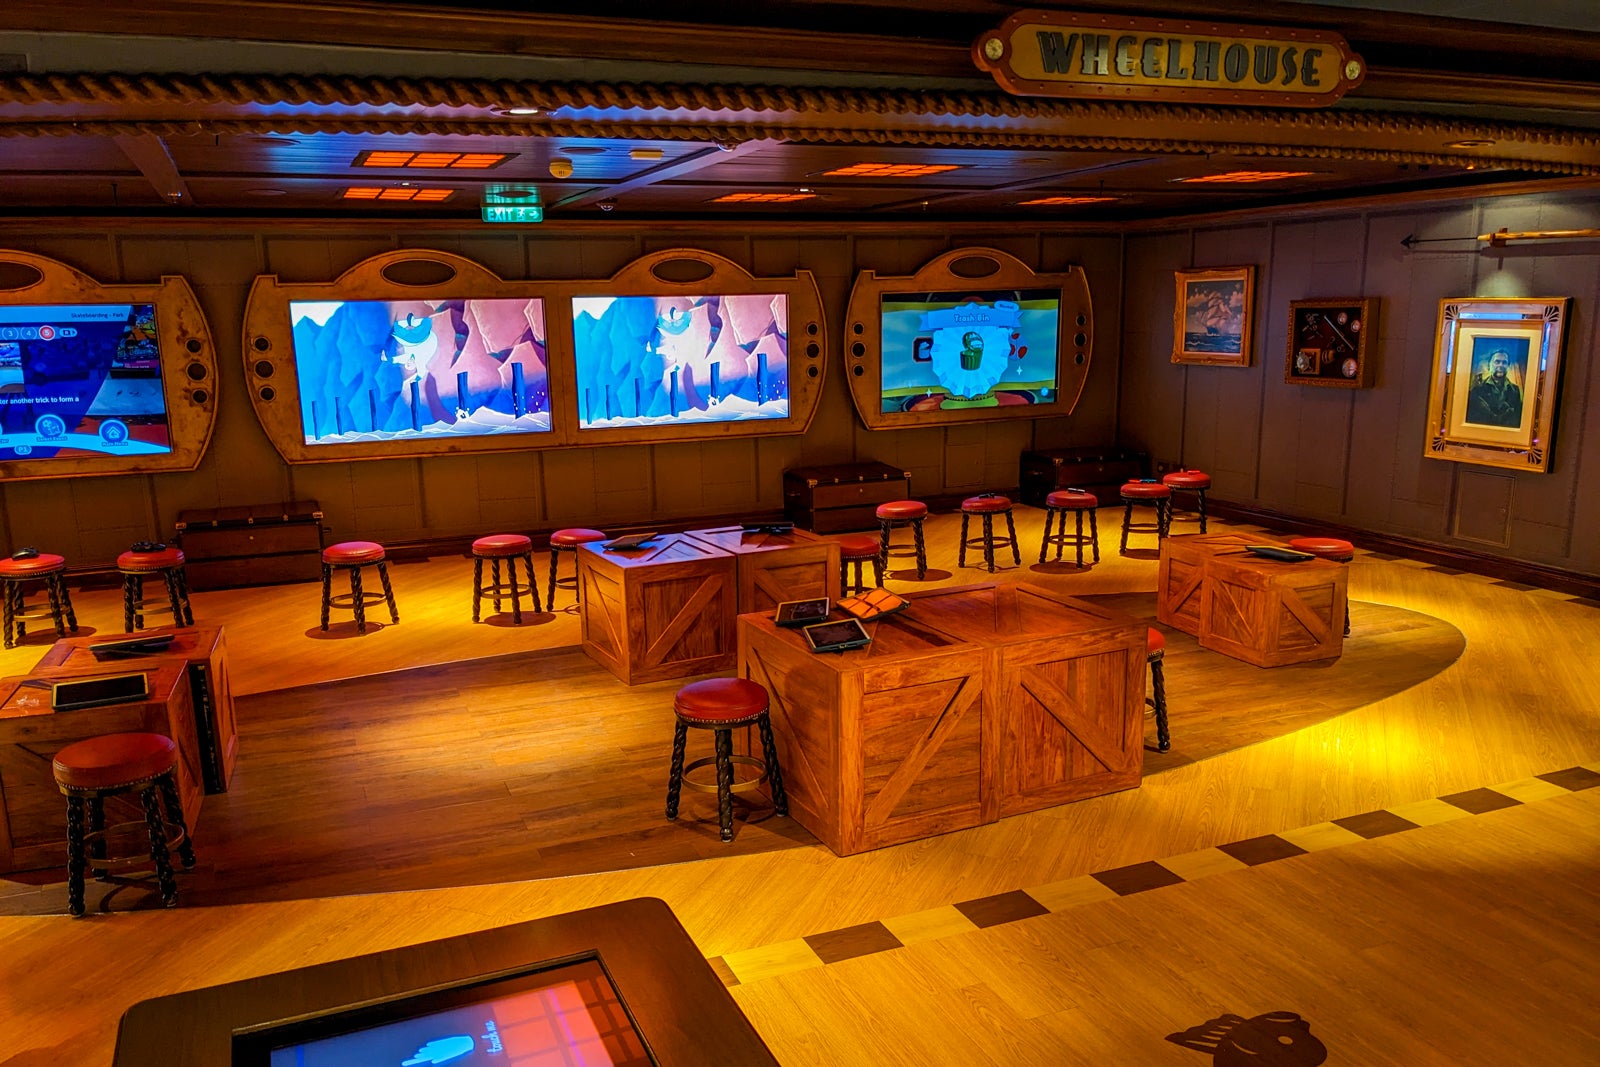 Disney cruise kids clubs: What to know about the Oceaneer Club - The Points  Guy